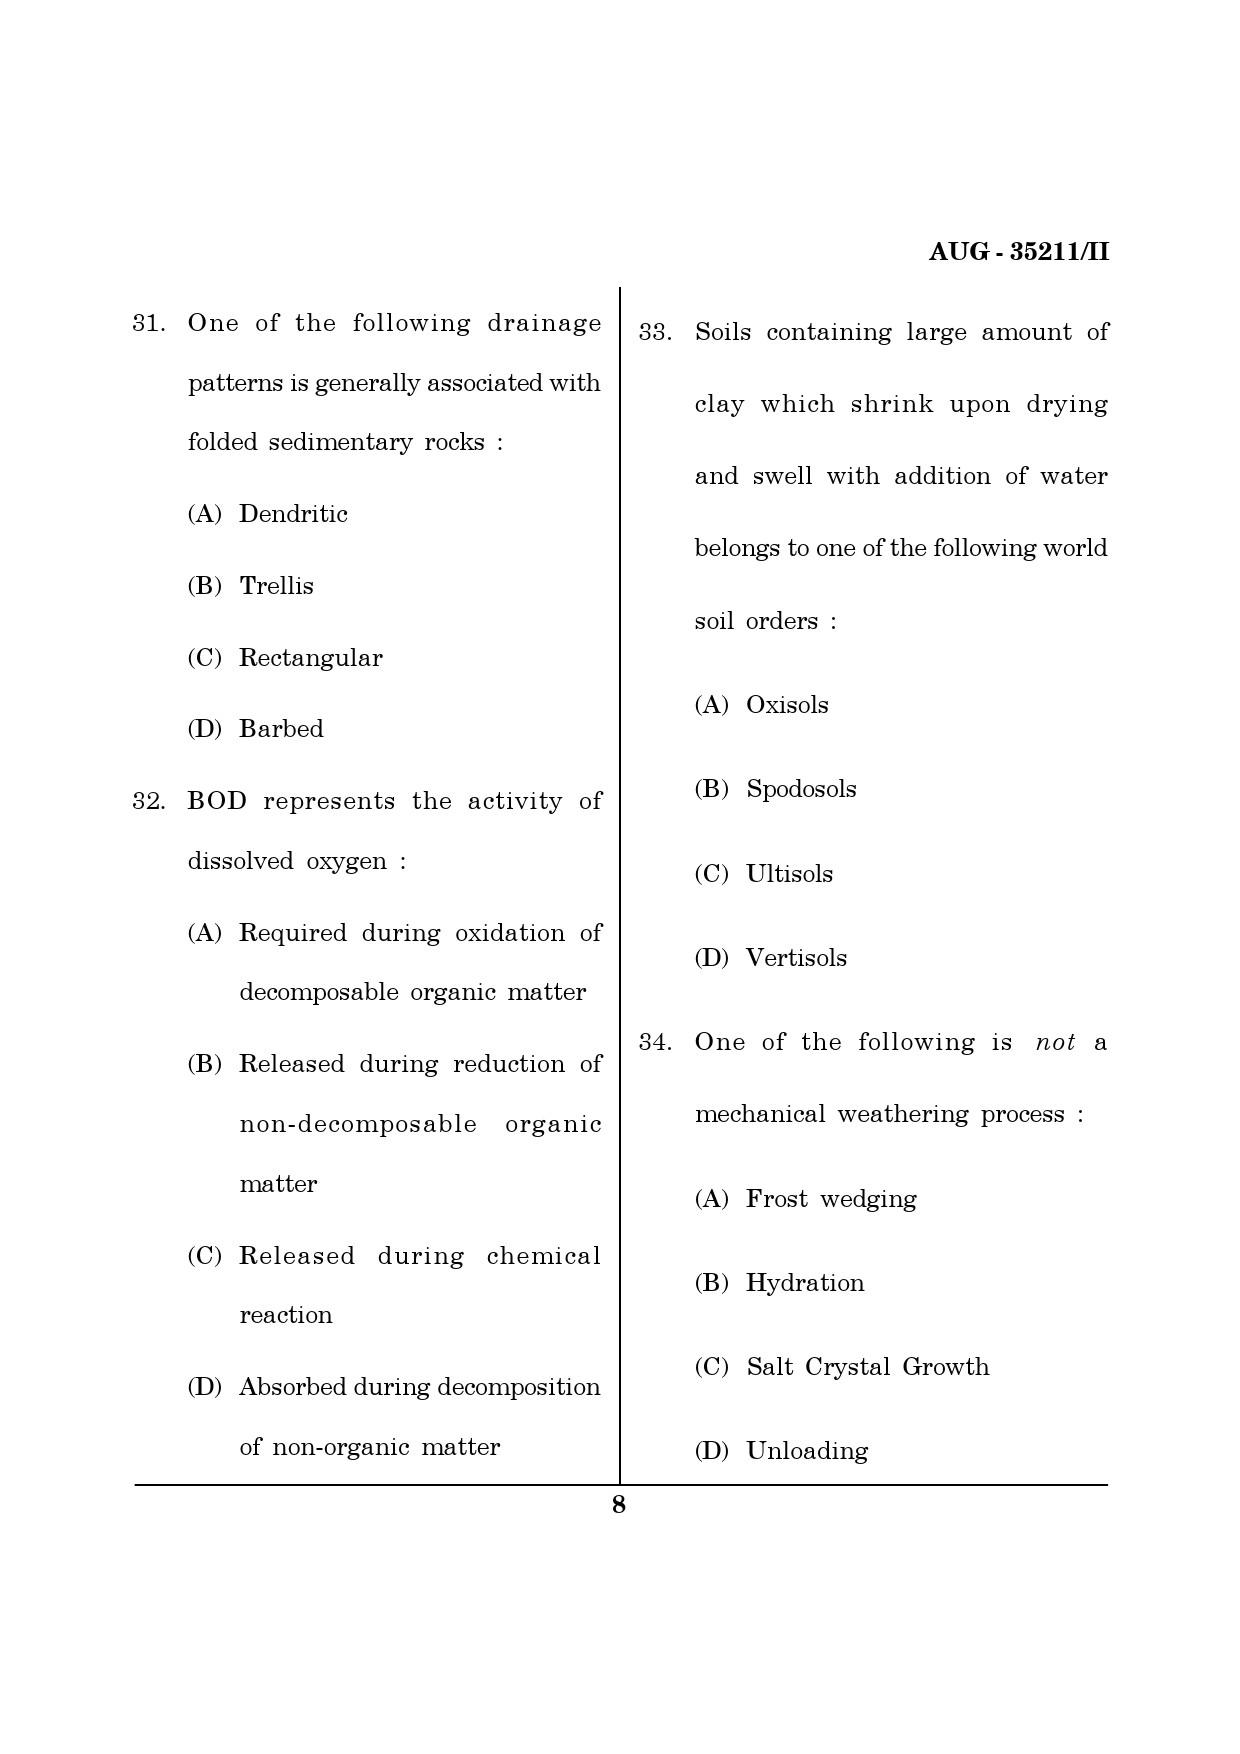 Maharashtra SET Earth Atmospheric Ocean Planetary Science Question Paper II August 2011 8